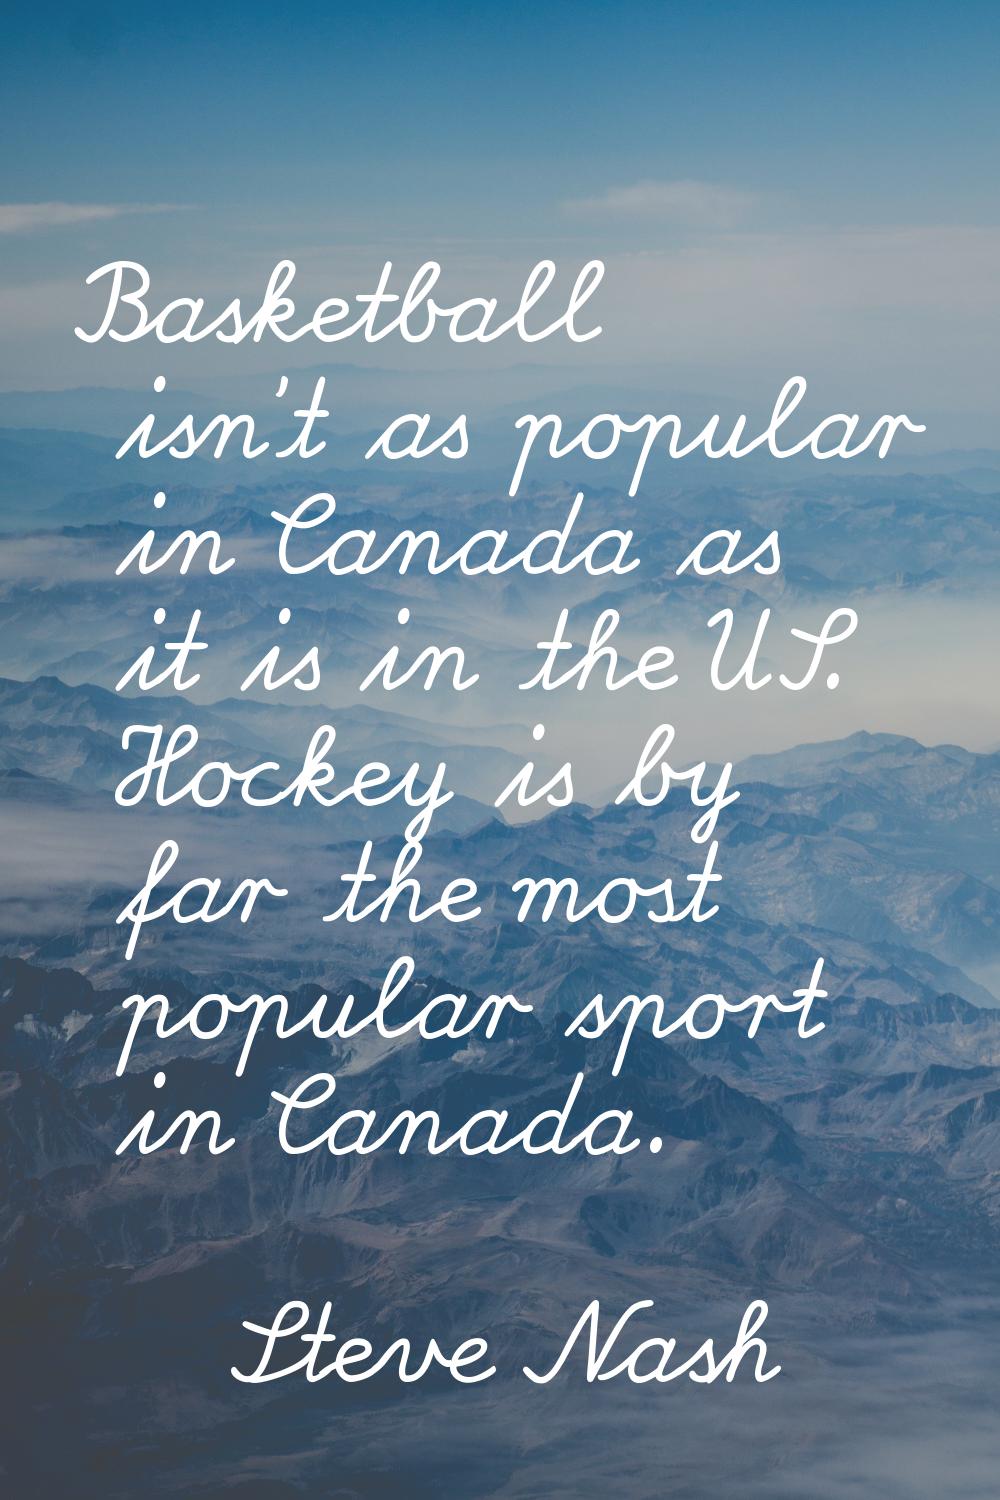 Basketball isn't as popular in Canada as it is in the US. Hockey is by far the most popular sport i